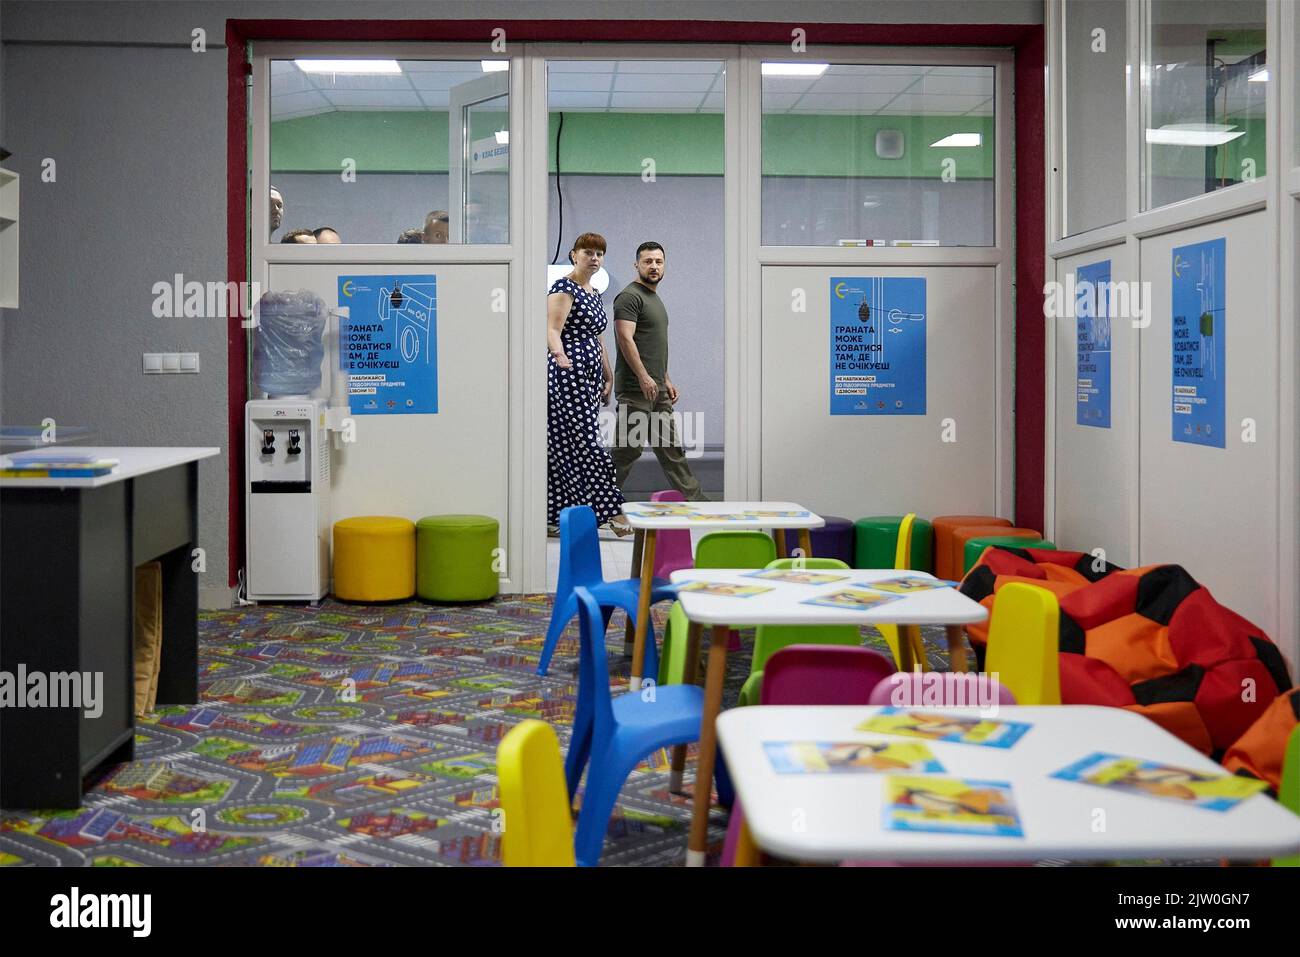 Irpin, Ukraine. 01st Sep, 2022. Ukrainian President Volodymyr Zelenskyy, visits young students on the first day of classes at the A. S. Makarenko elementary school, September 1, 2022 in Irpin, Ukraine. The school was rebuilt with UNICEF help after being destroyed in Russian attacks last March. Credit: Sarsenov Daniiar/Ukraine Presidency/Alamy Live News Stock Photo